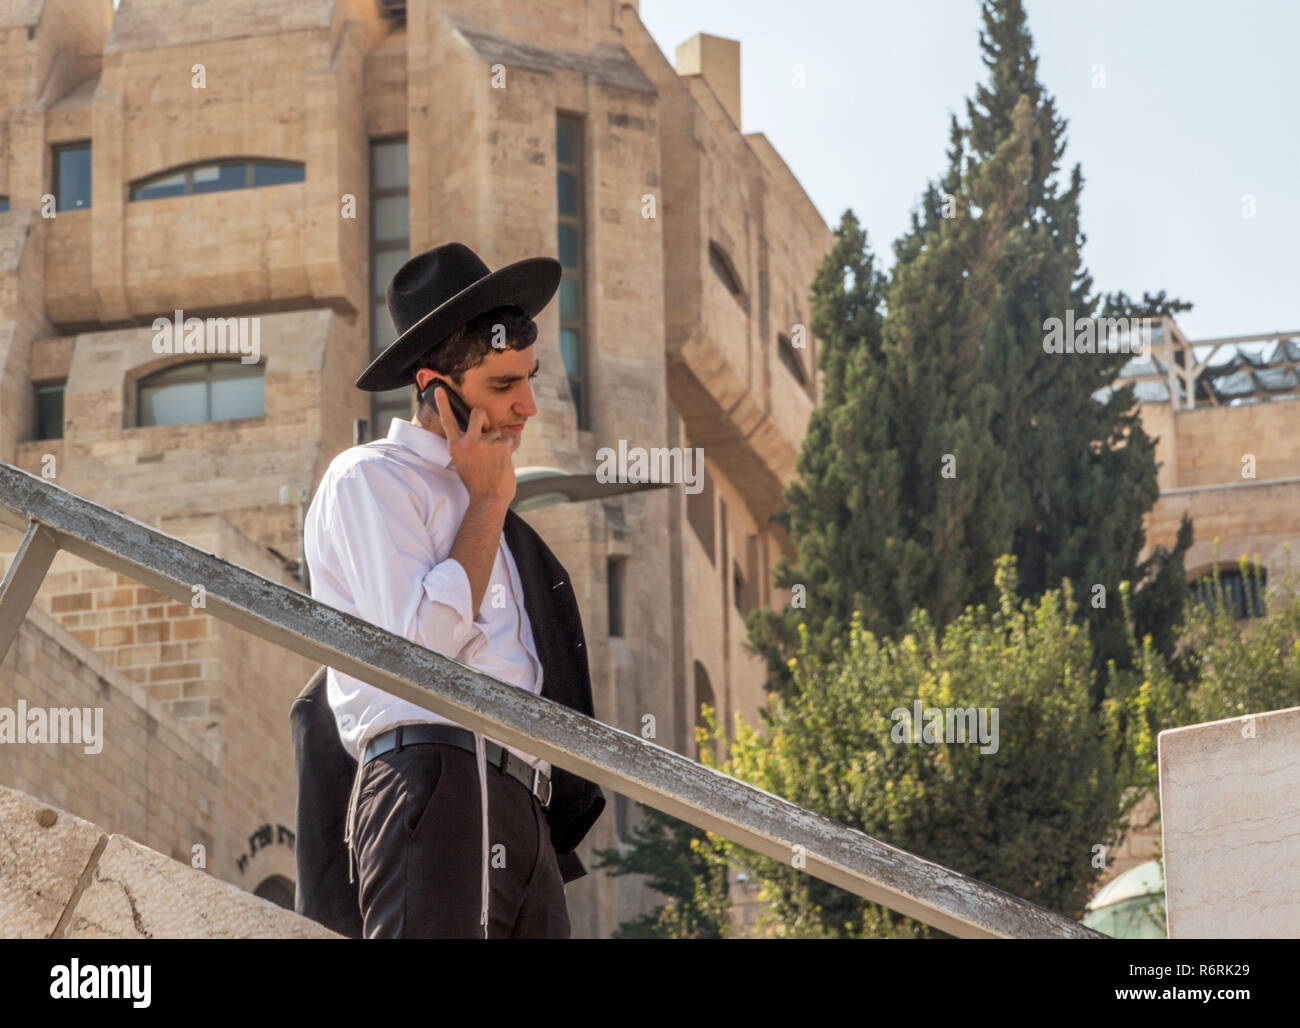 Orthodox Jewish man near the Western wall or Wailing wall, old city of Jerusalem, Israel, Middle East Stock Photo